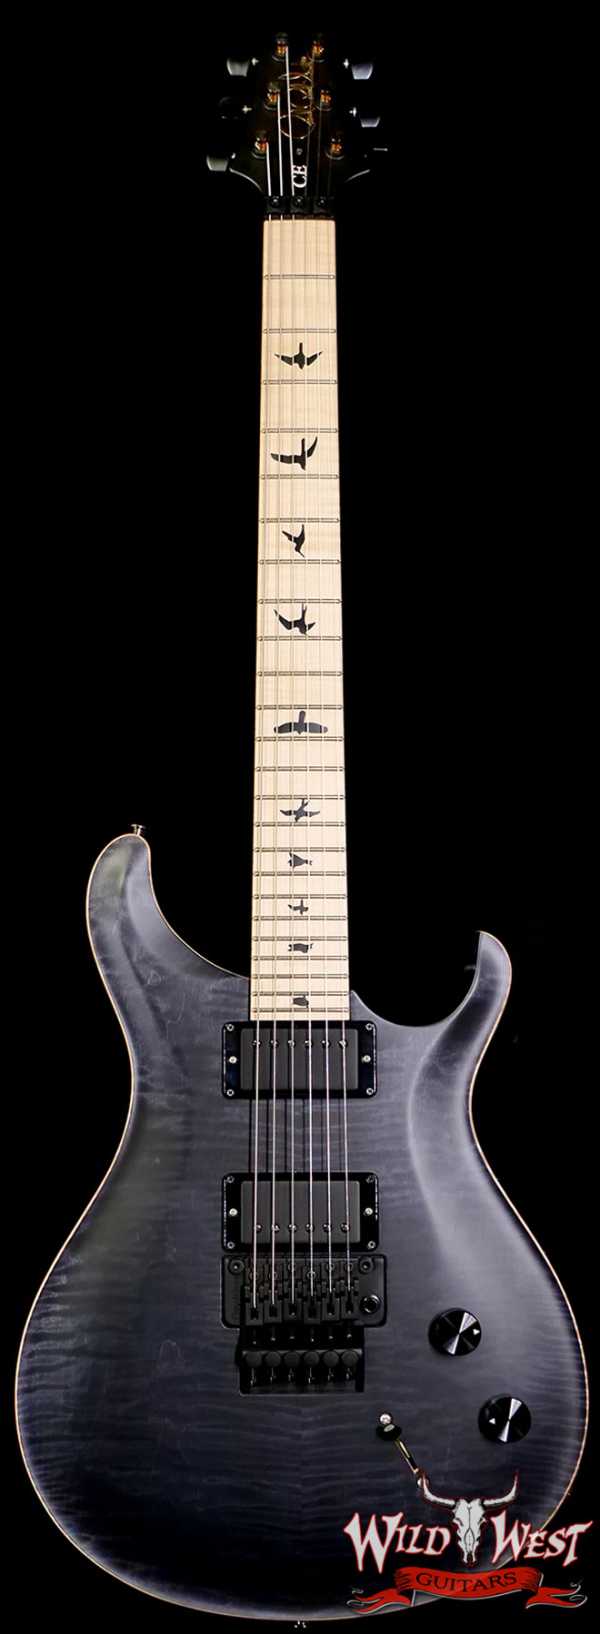 Paul Reed Smith PRS Bolt-On Series Dustie Waring Signature CE 24 Floyd FR Maple Board Gray Black 7.65 LBS